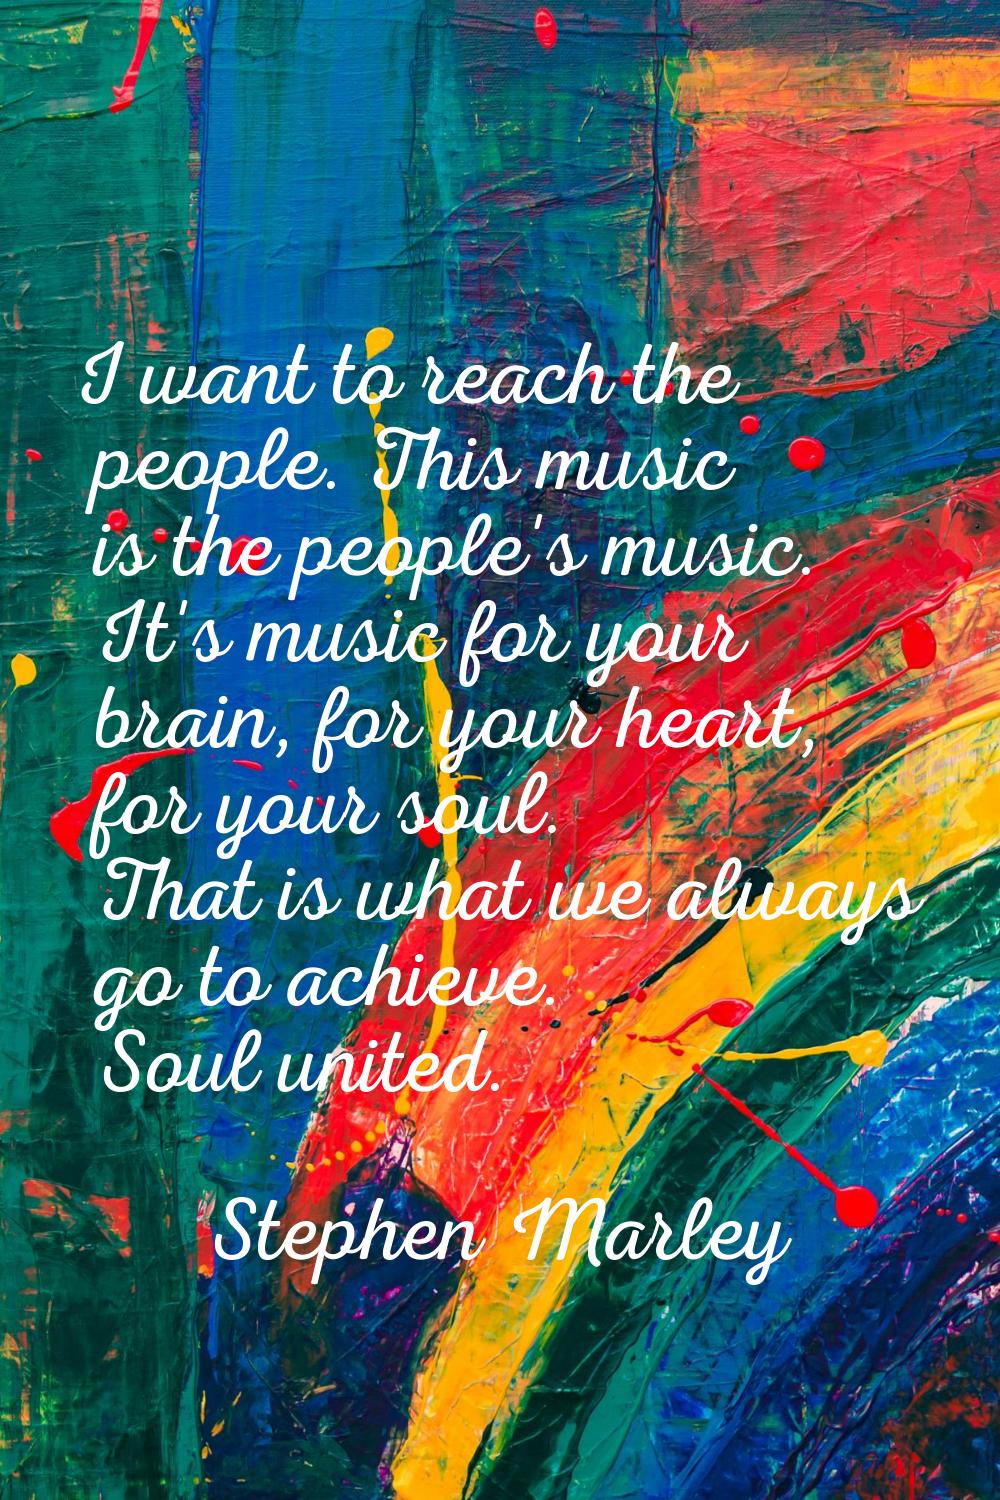 I want to reach the people. This music is the people's music. It's music for your brain, for your h